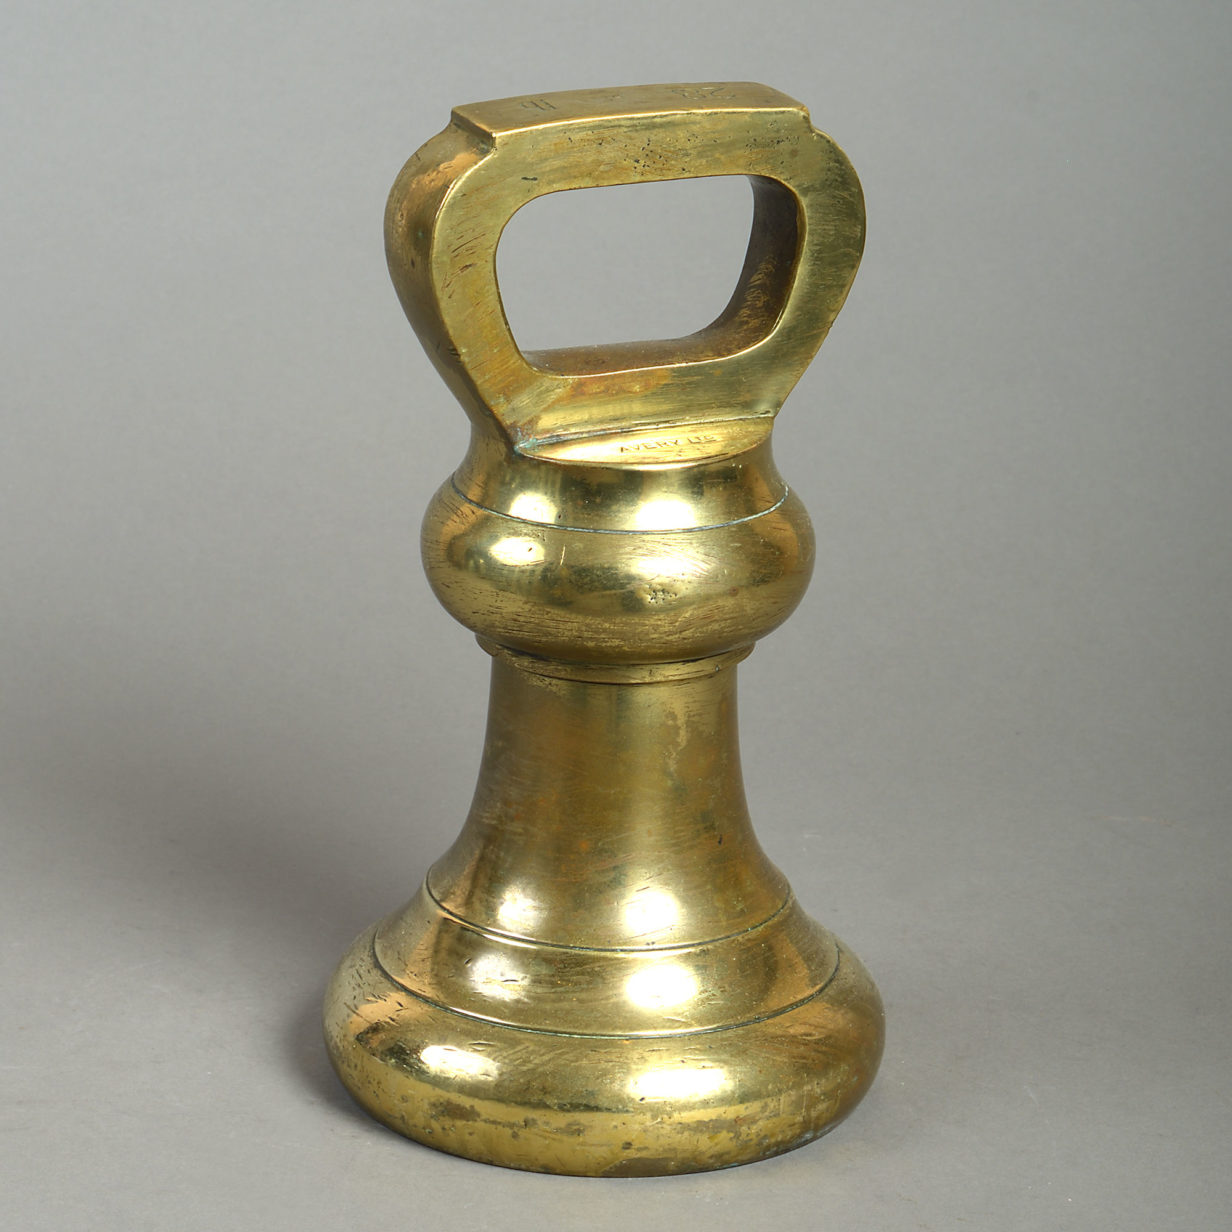 Large 19th century 28 lb brass bell weight by avery ltd